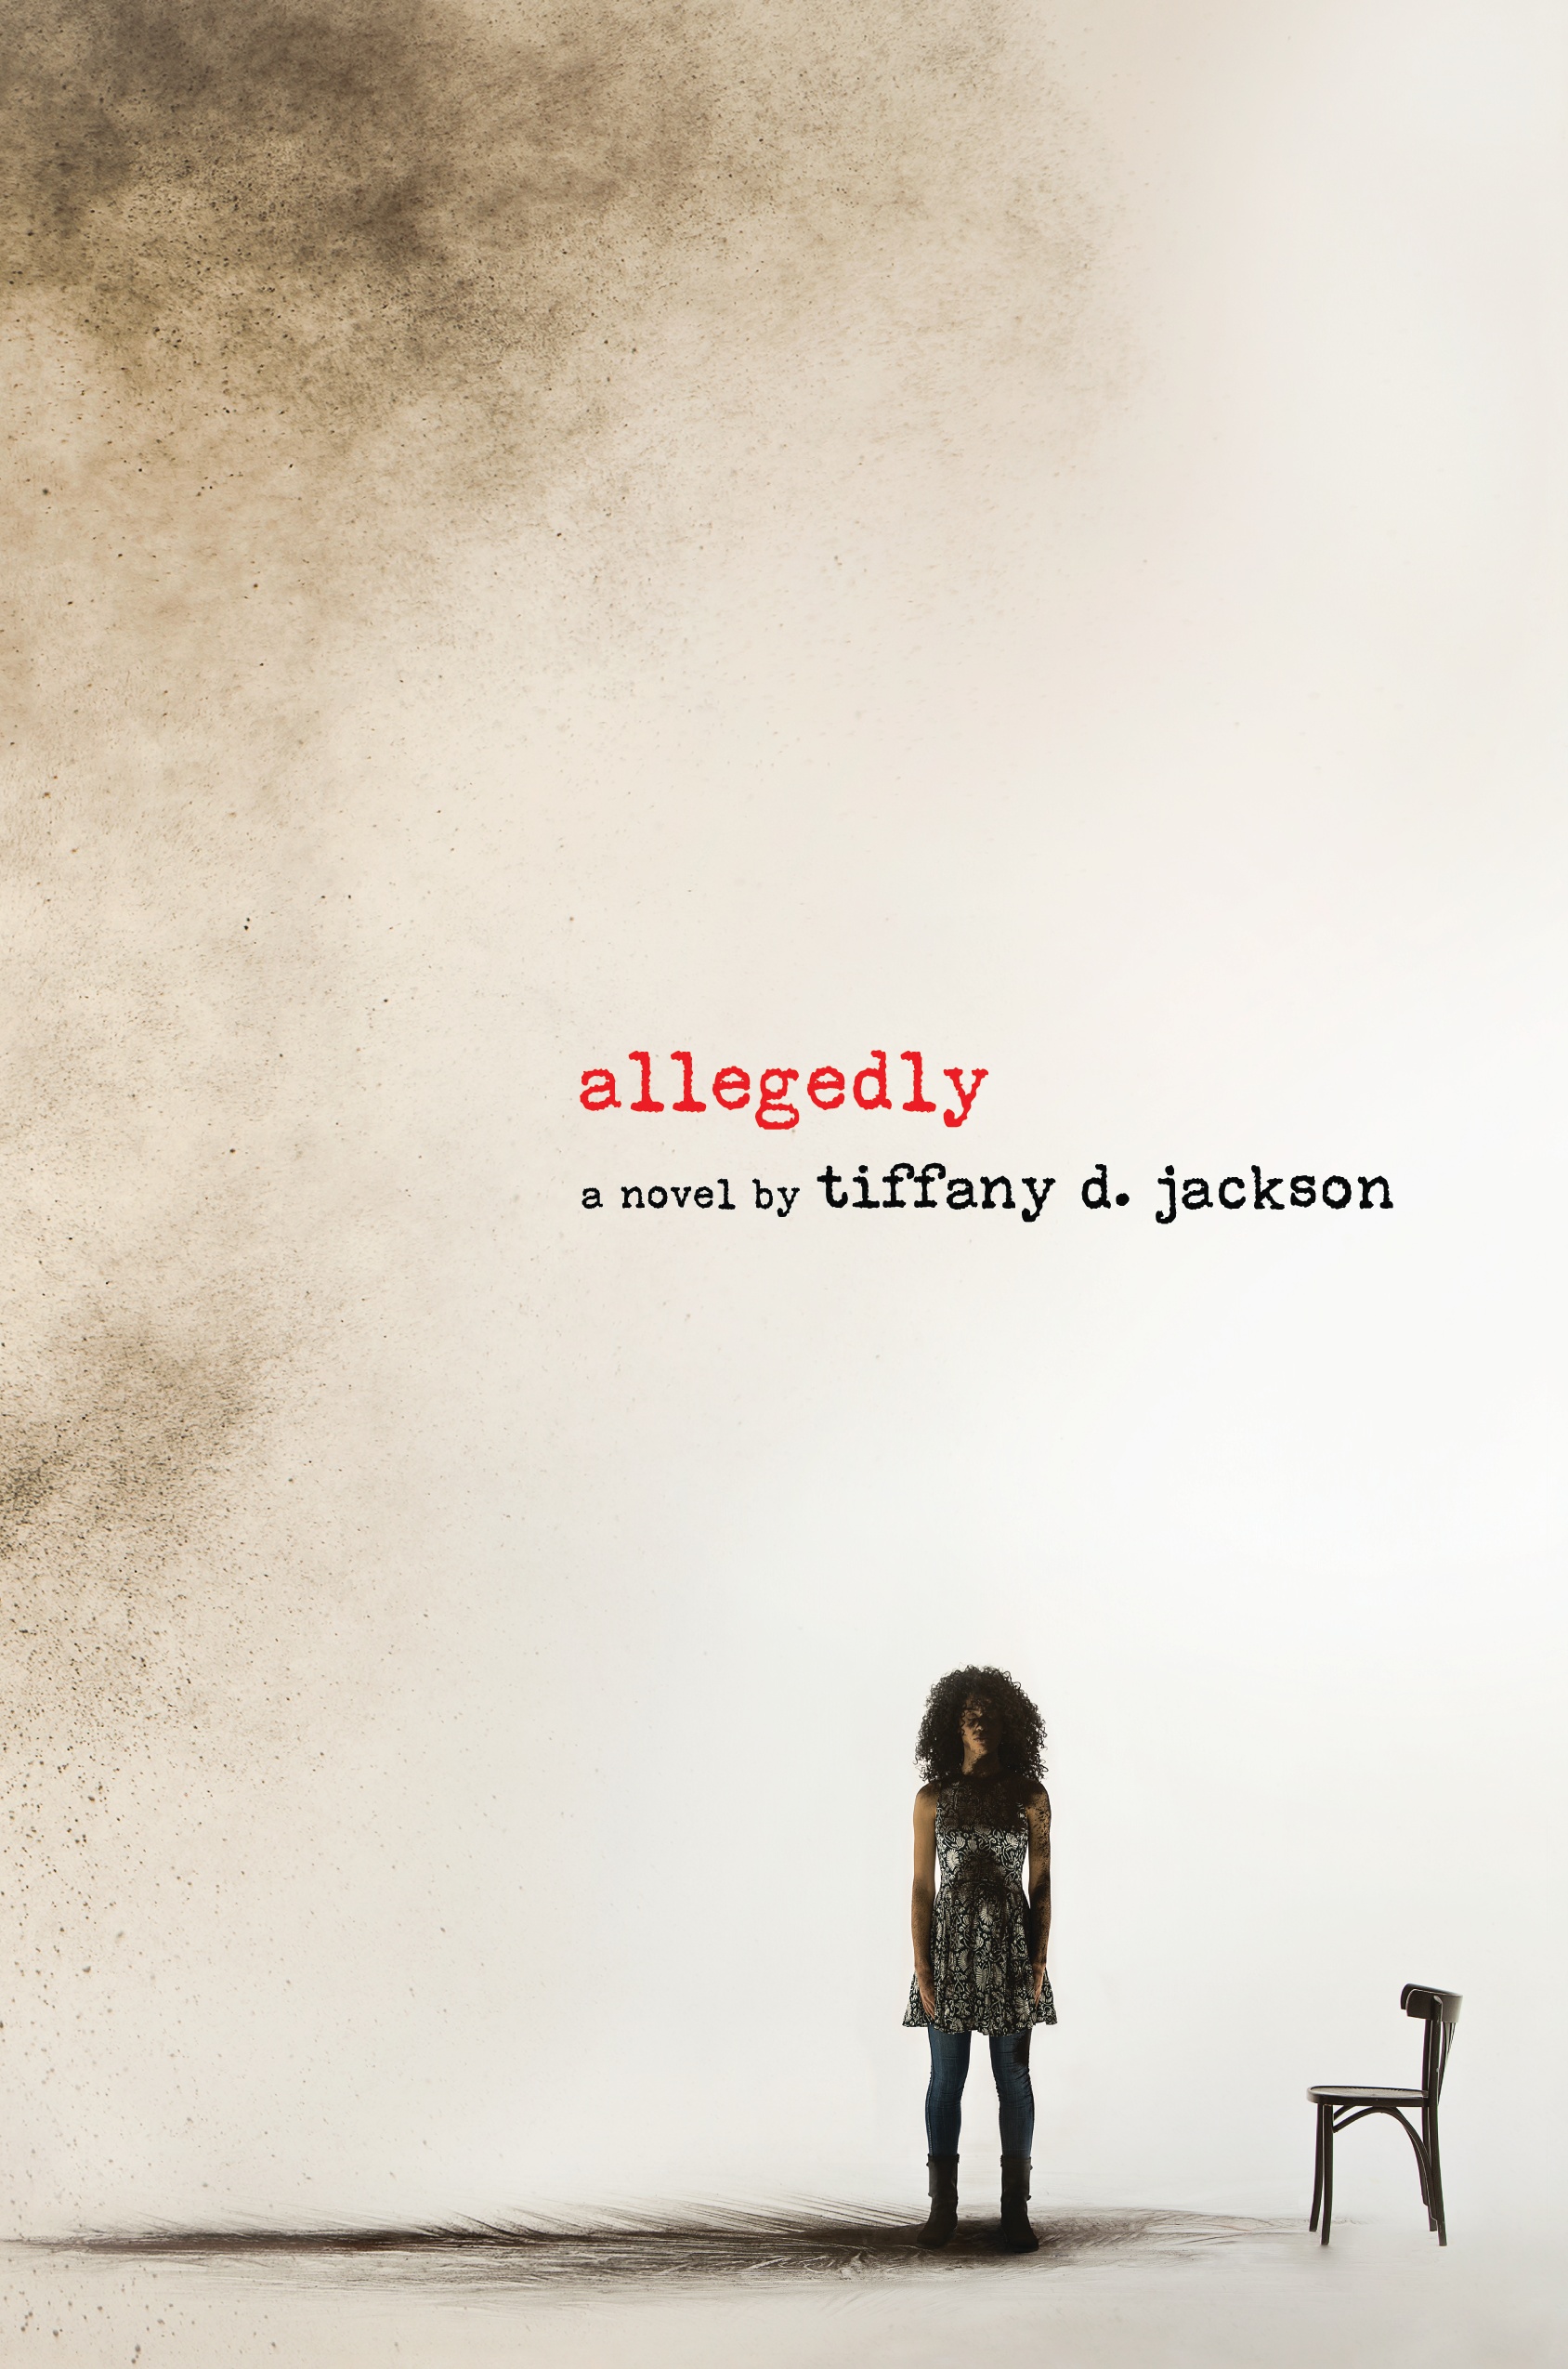 Book Launch: Allegedly by Tiffany D. Jackson